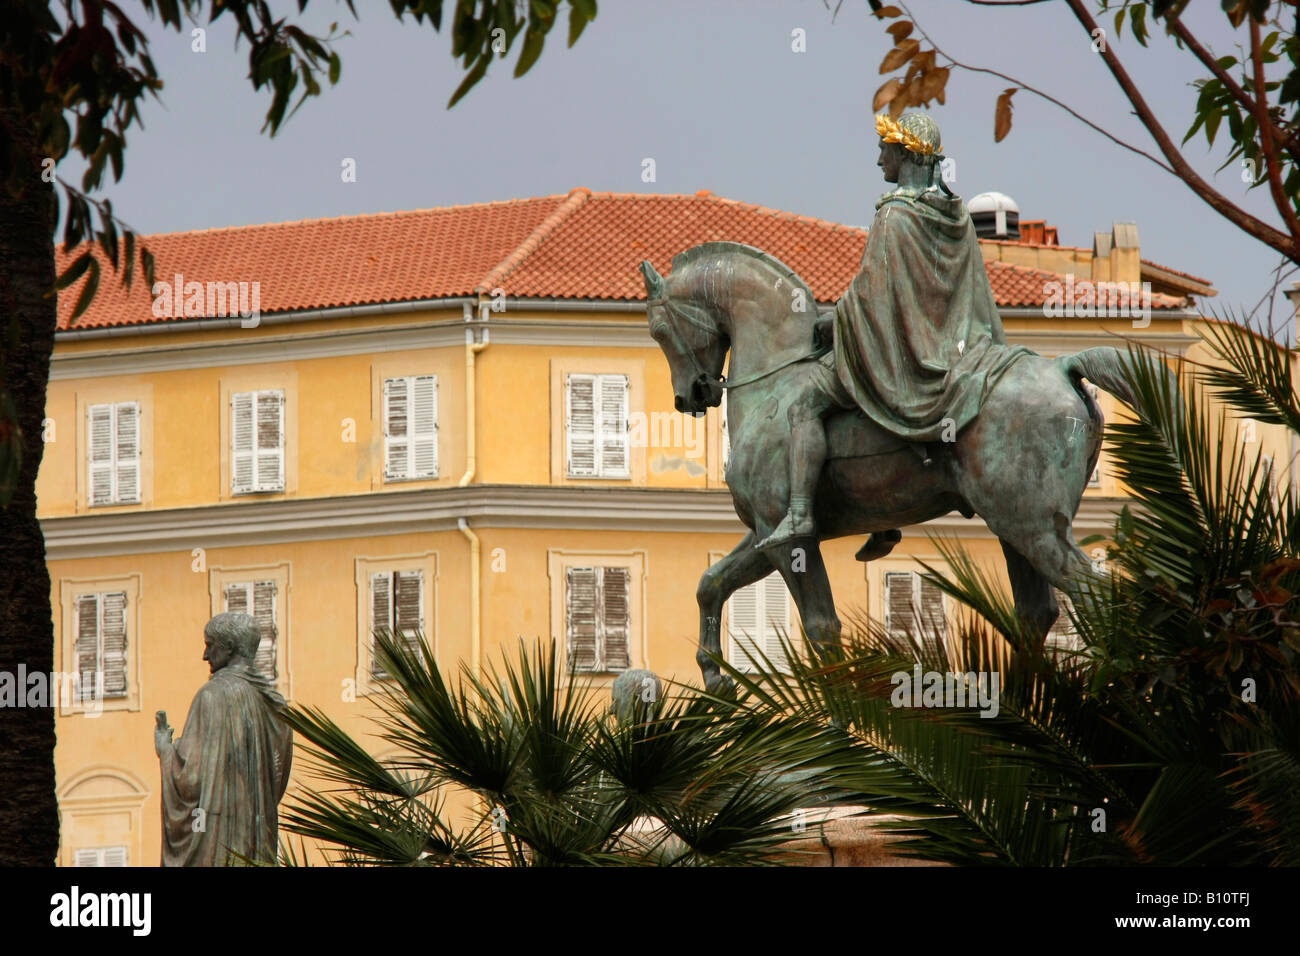 statue of Napoleon on a horse on Place De Gaulle in Ajaccio Corsica France Stock Photo